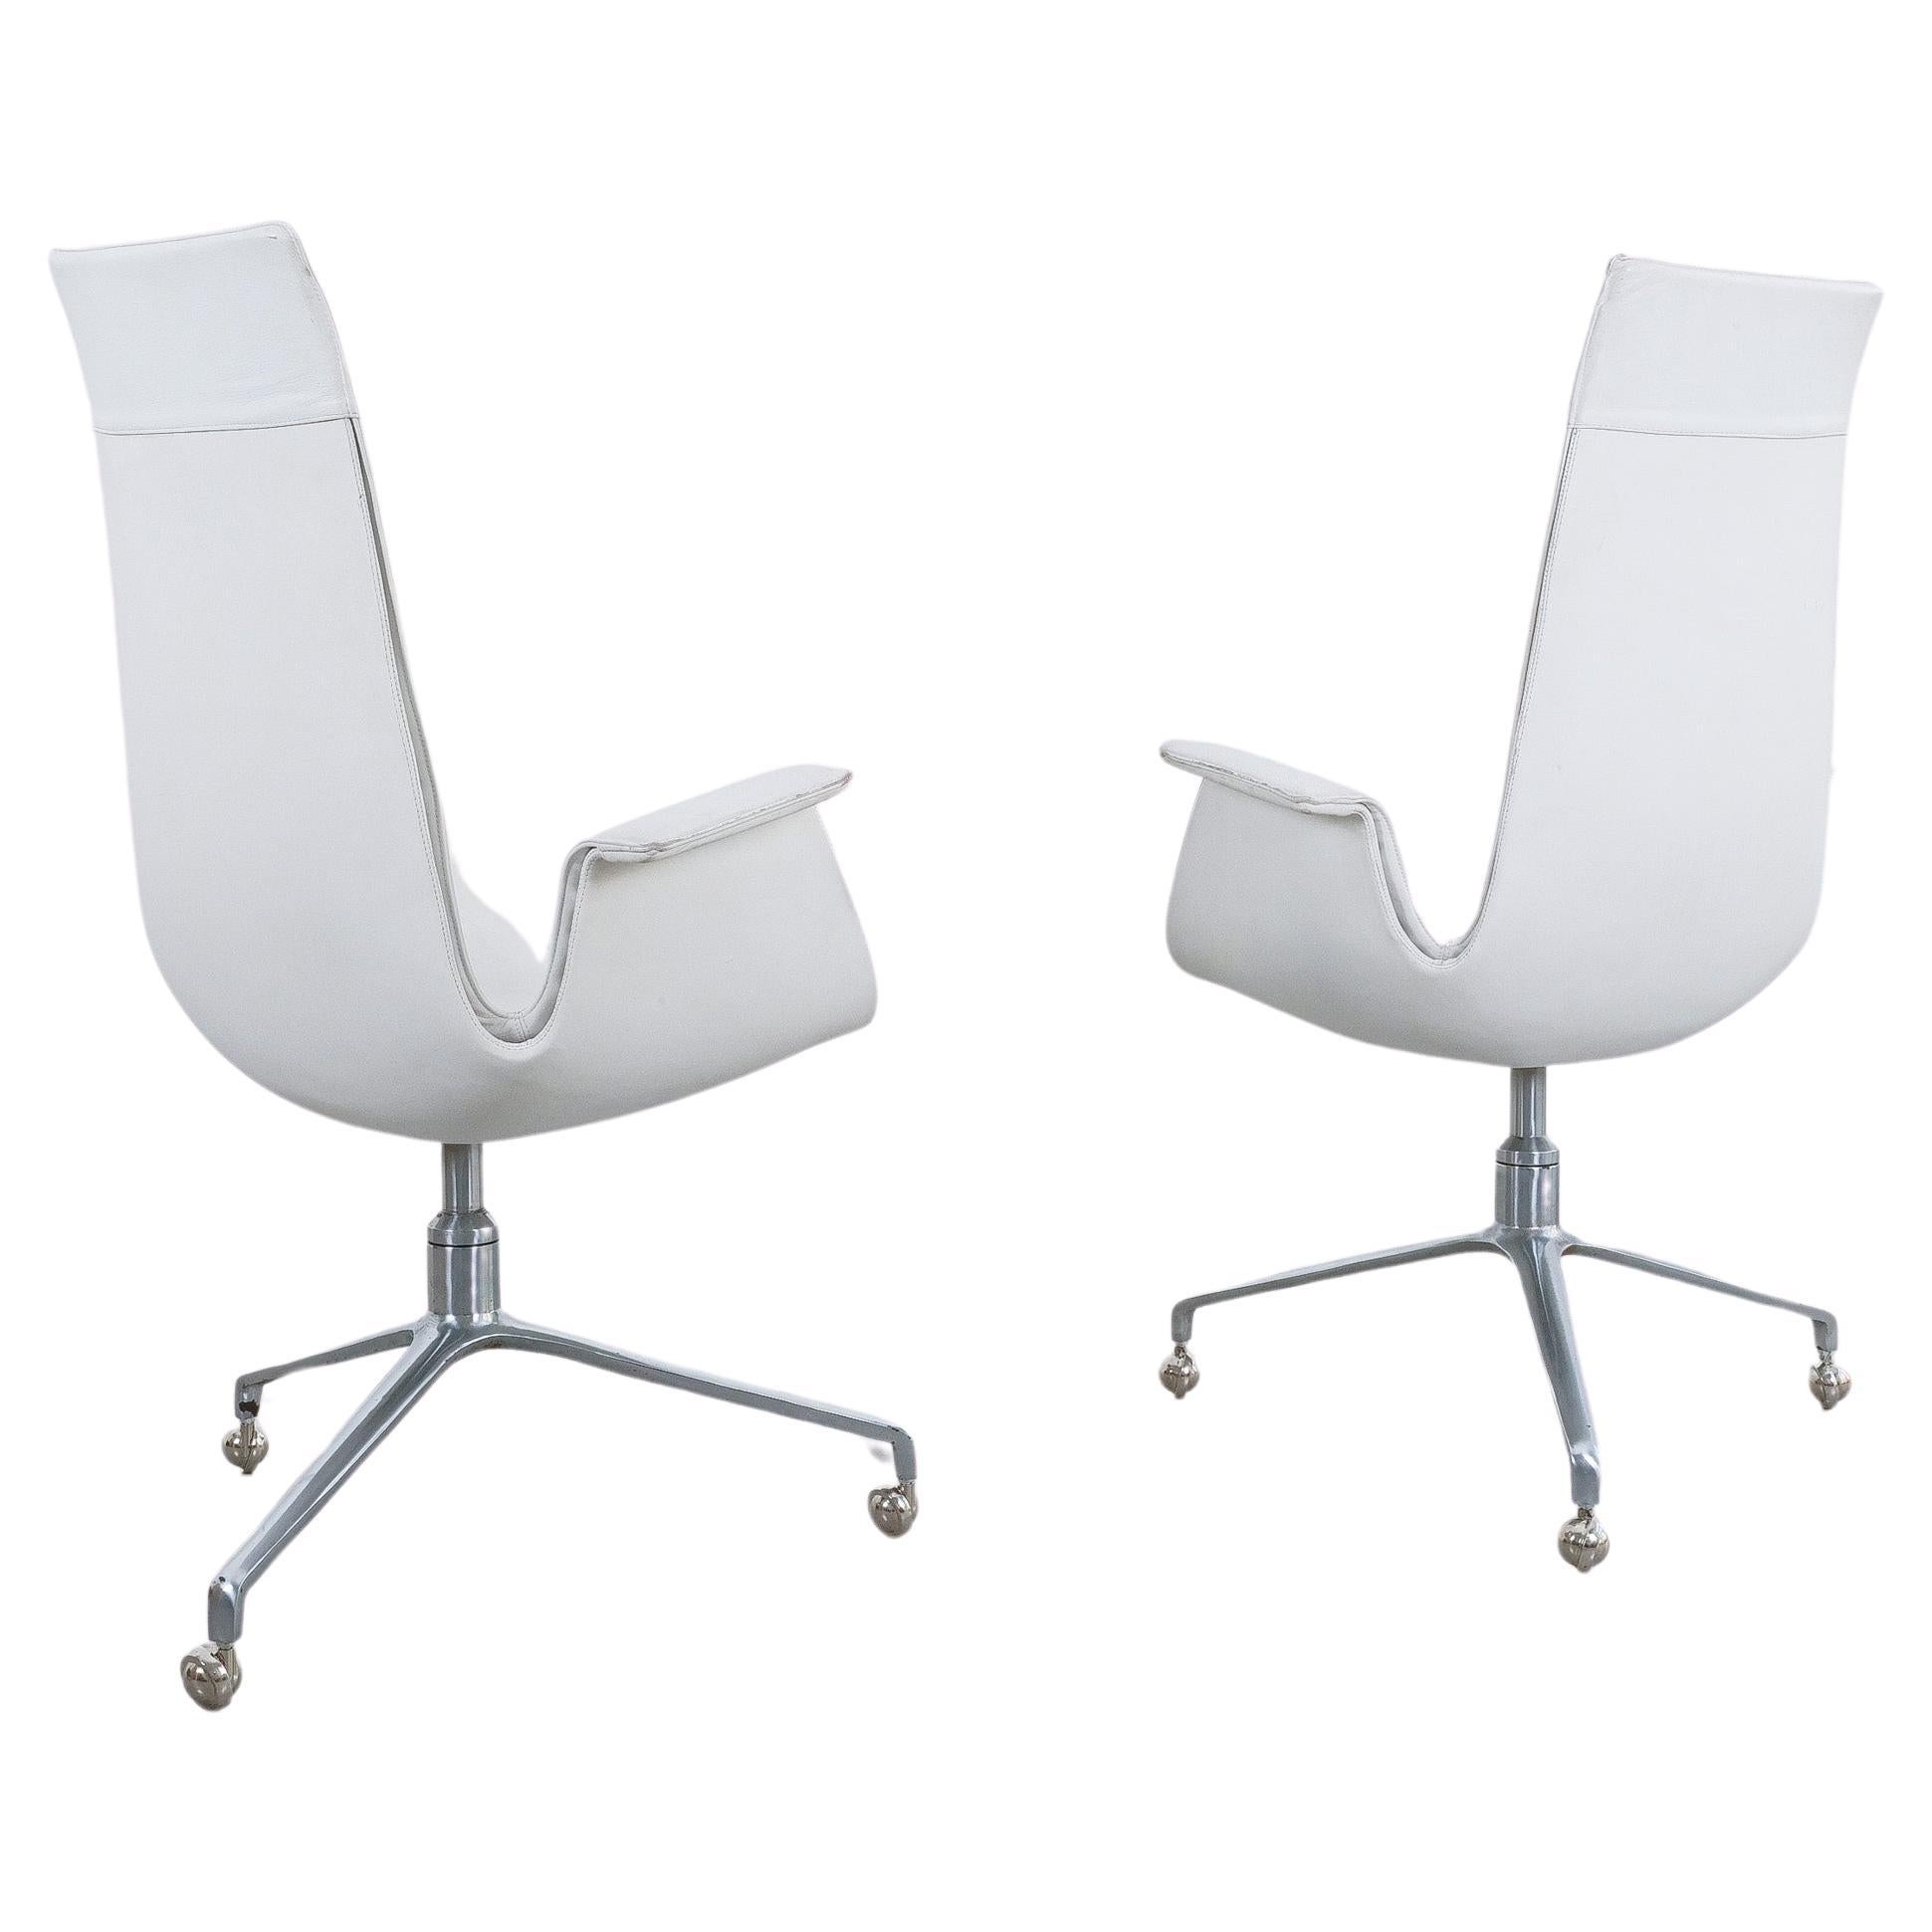 Fabricius and Kastholm White High Back Desk Chairs (3) Swivel Base FK 6725, 1964